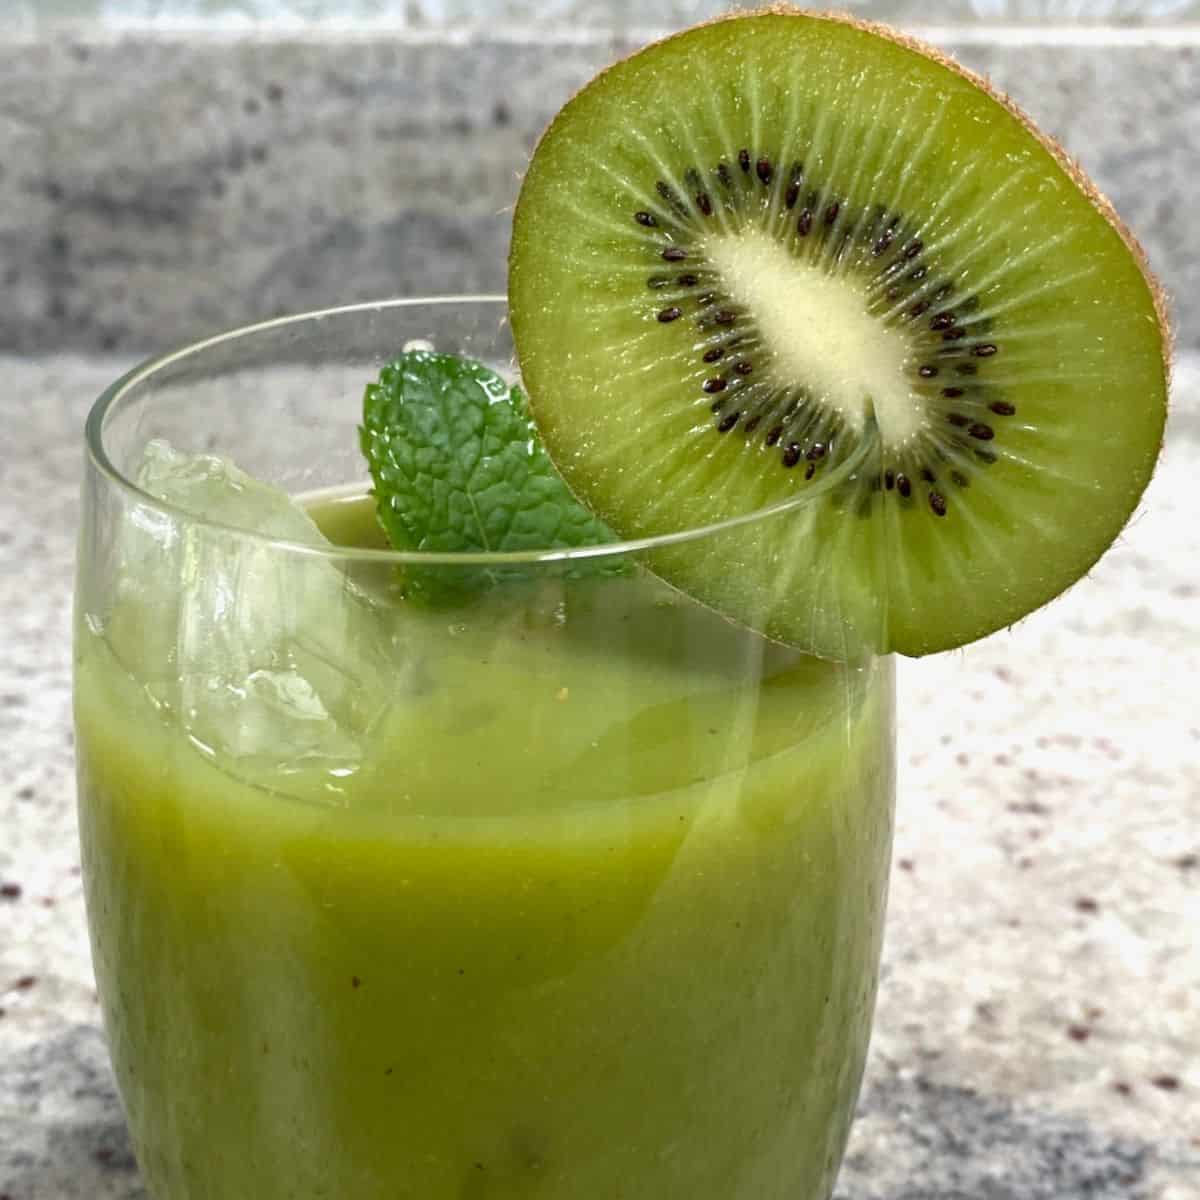 How to Make Kiwi Juice (With or Without Juicer)